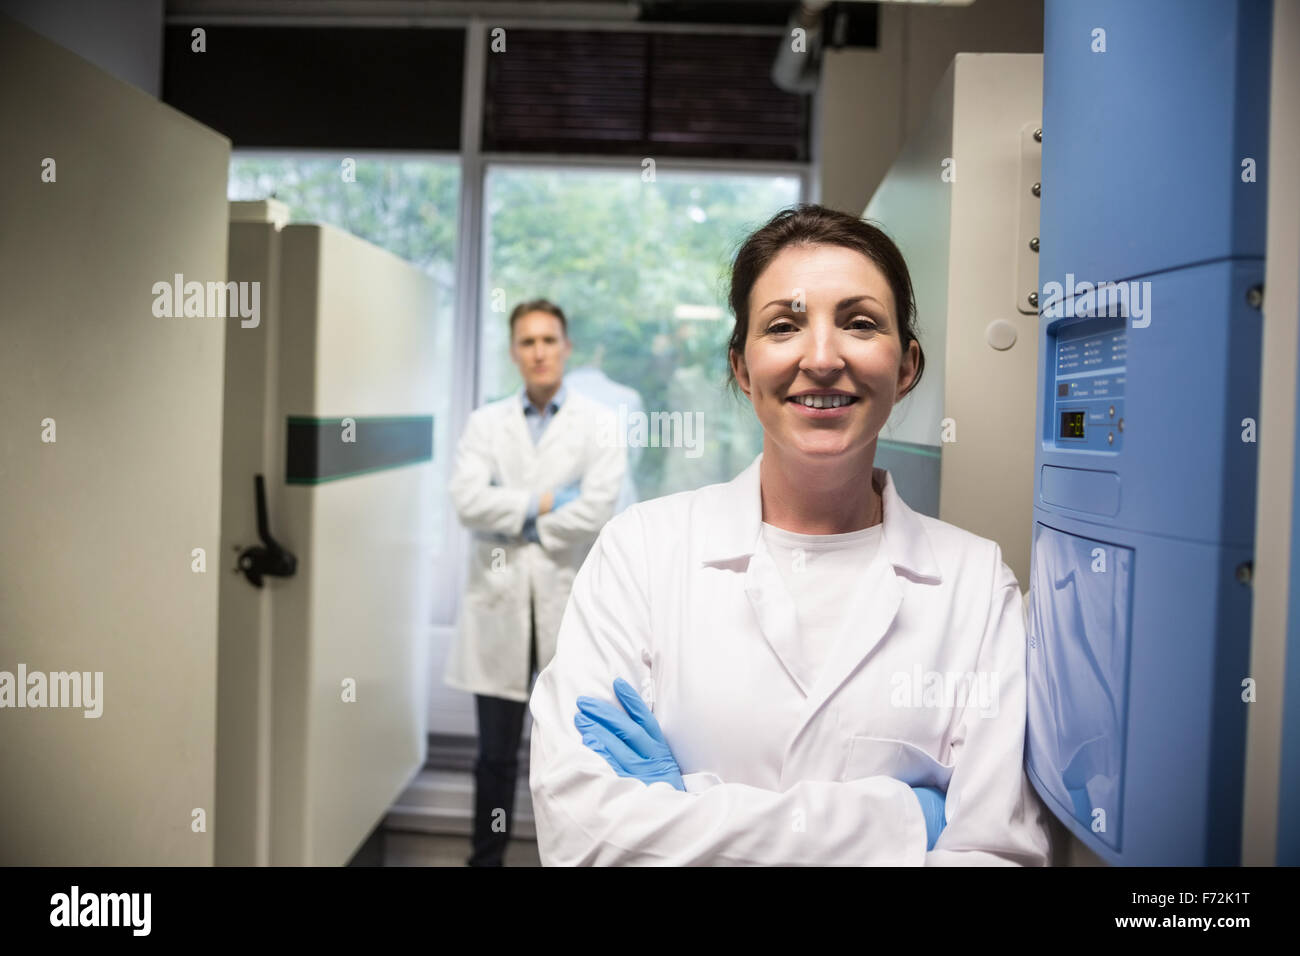 Two scientists smiling at camera Stock Photo